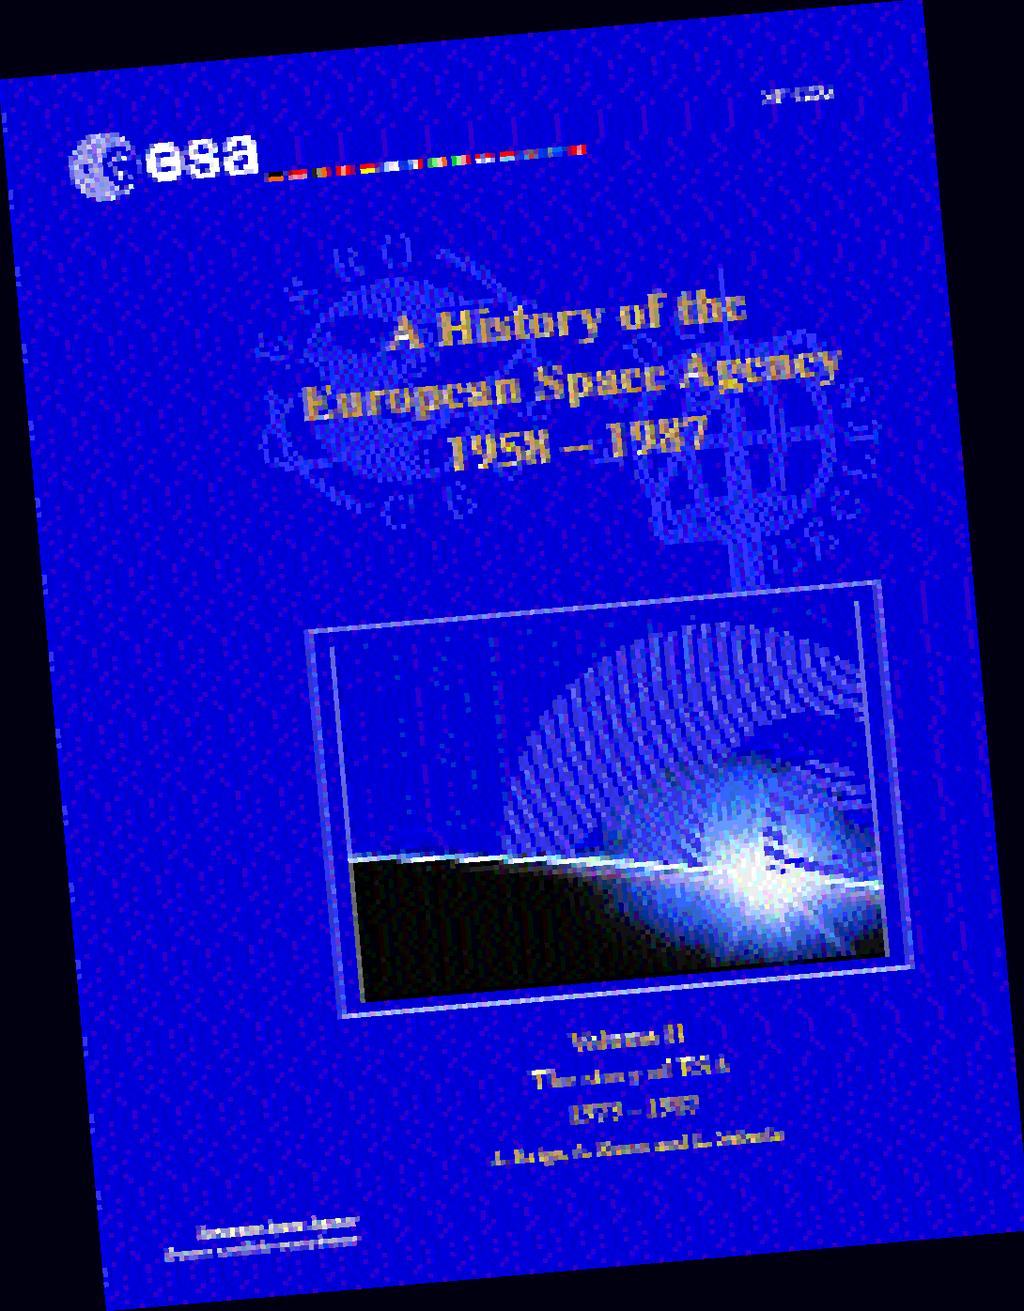 creation of a single space agency in the early 1970s and up to the late 1980s, in the light of